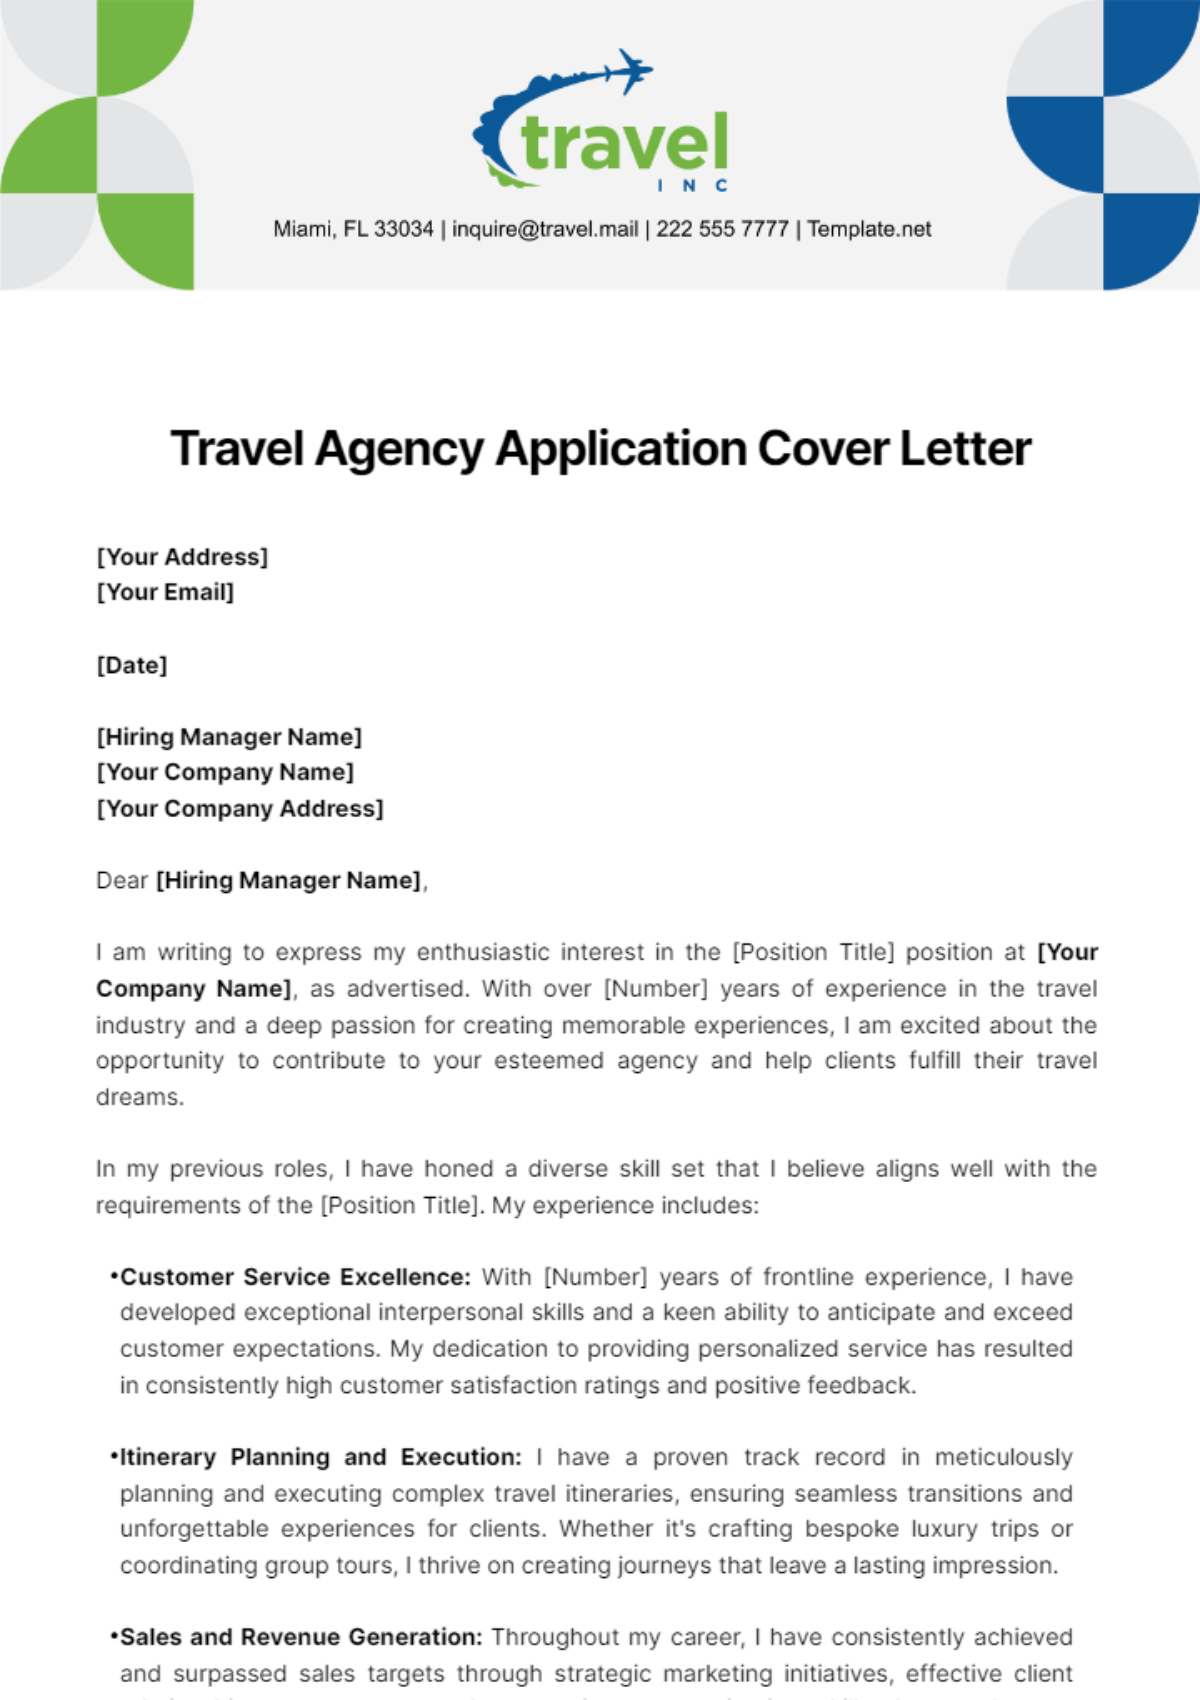 Travel Agency Application Cover Letter Template